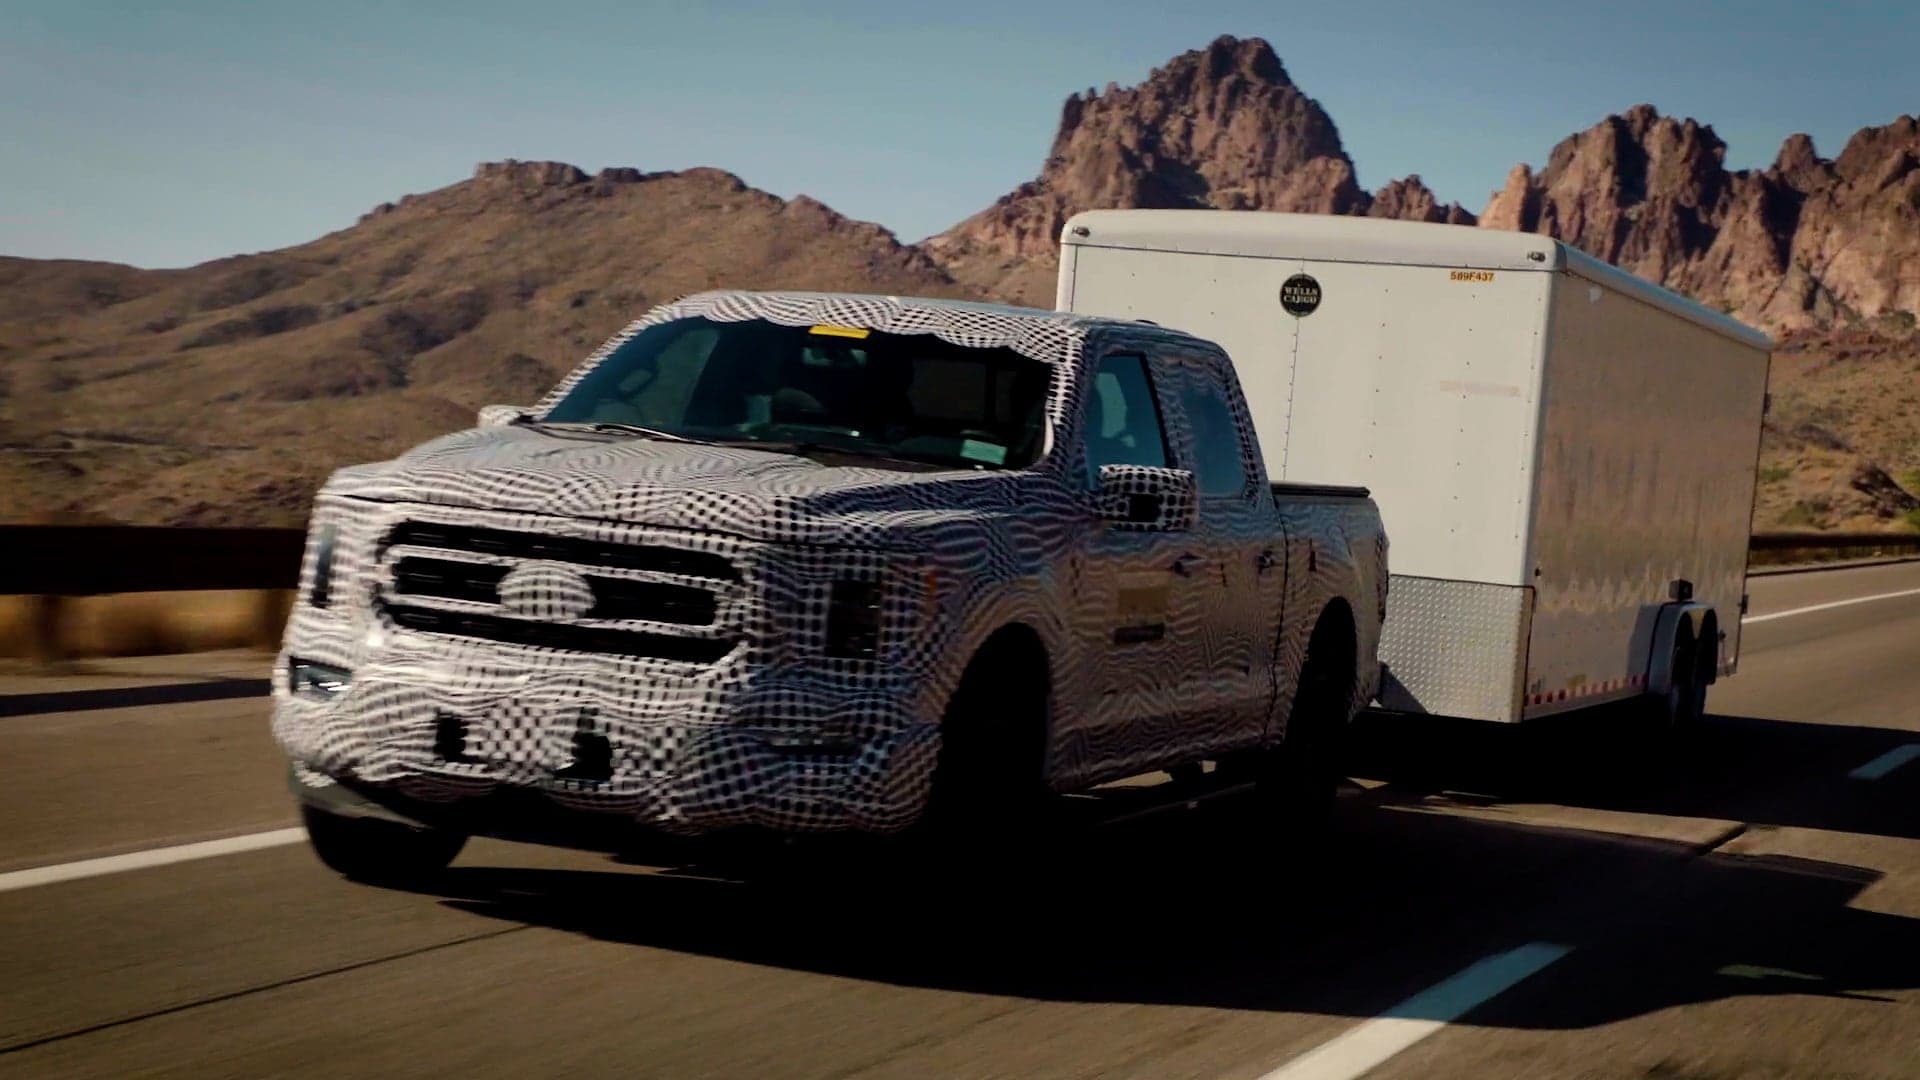 Here’s How Ford Torture Tested the F-150 Hybrid to Make Sure It Doesn’t Blow This Shot